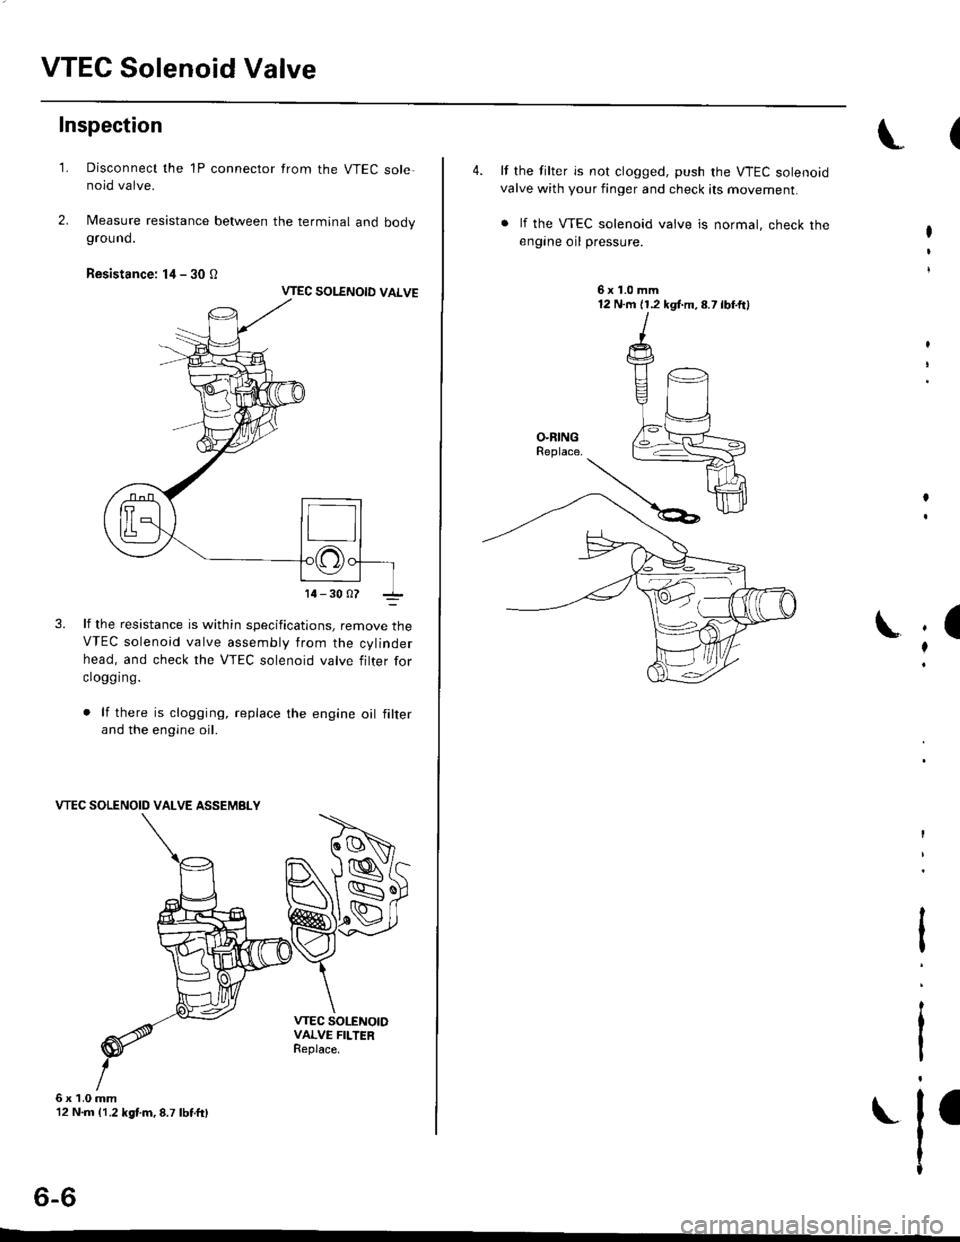 HONDA CIVIC 1999 6.G User Guide VTEC Solenoid Valve
Inspection
1.
6x1.0mm12 N.m 11.2 kgf.m,8.7 lbtft)
Disconnect the 1P connector from the VTEC sole-noid valve.
Measure resistance between the terminal and bodyground.
Resistance: l4 